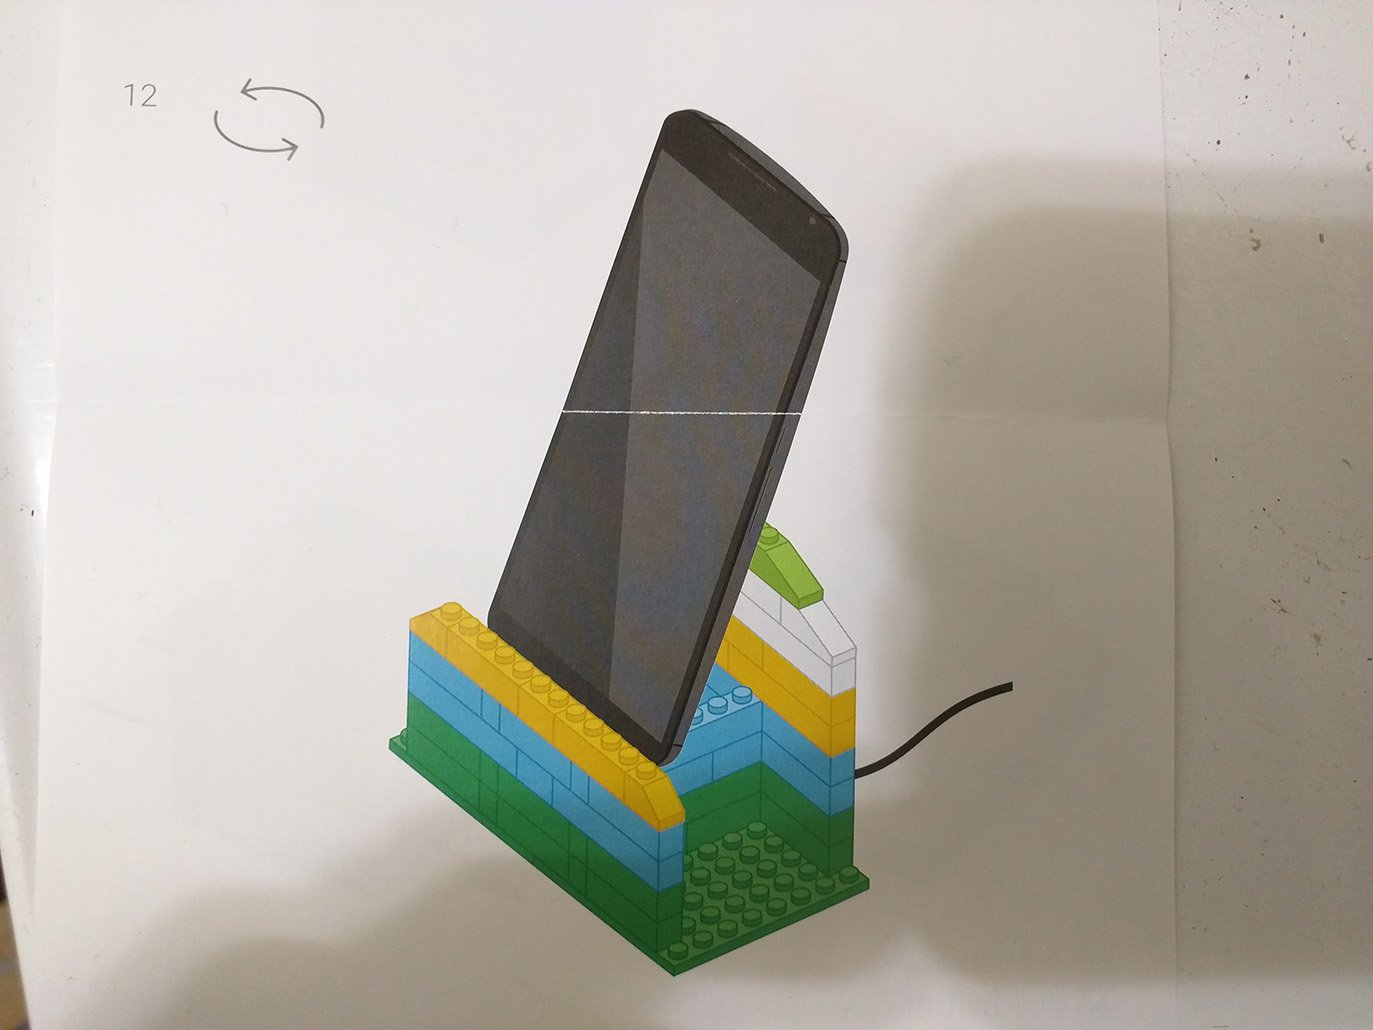 Lego project fi phone stand image 7